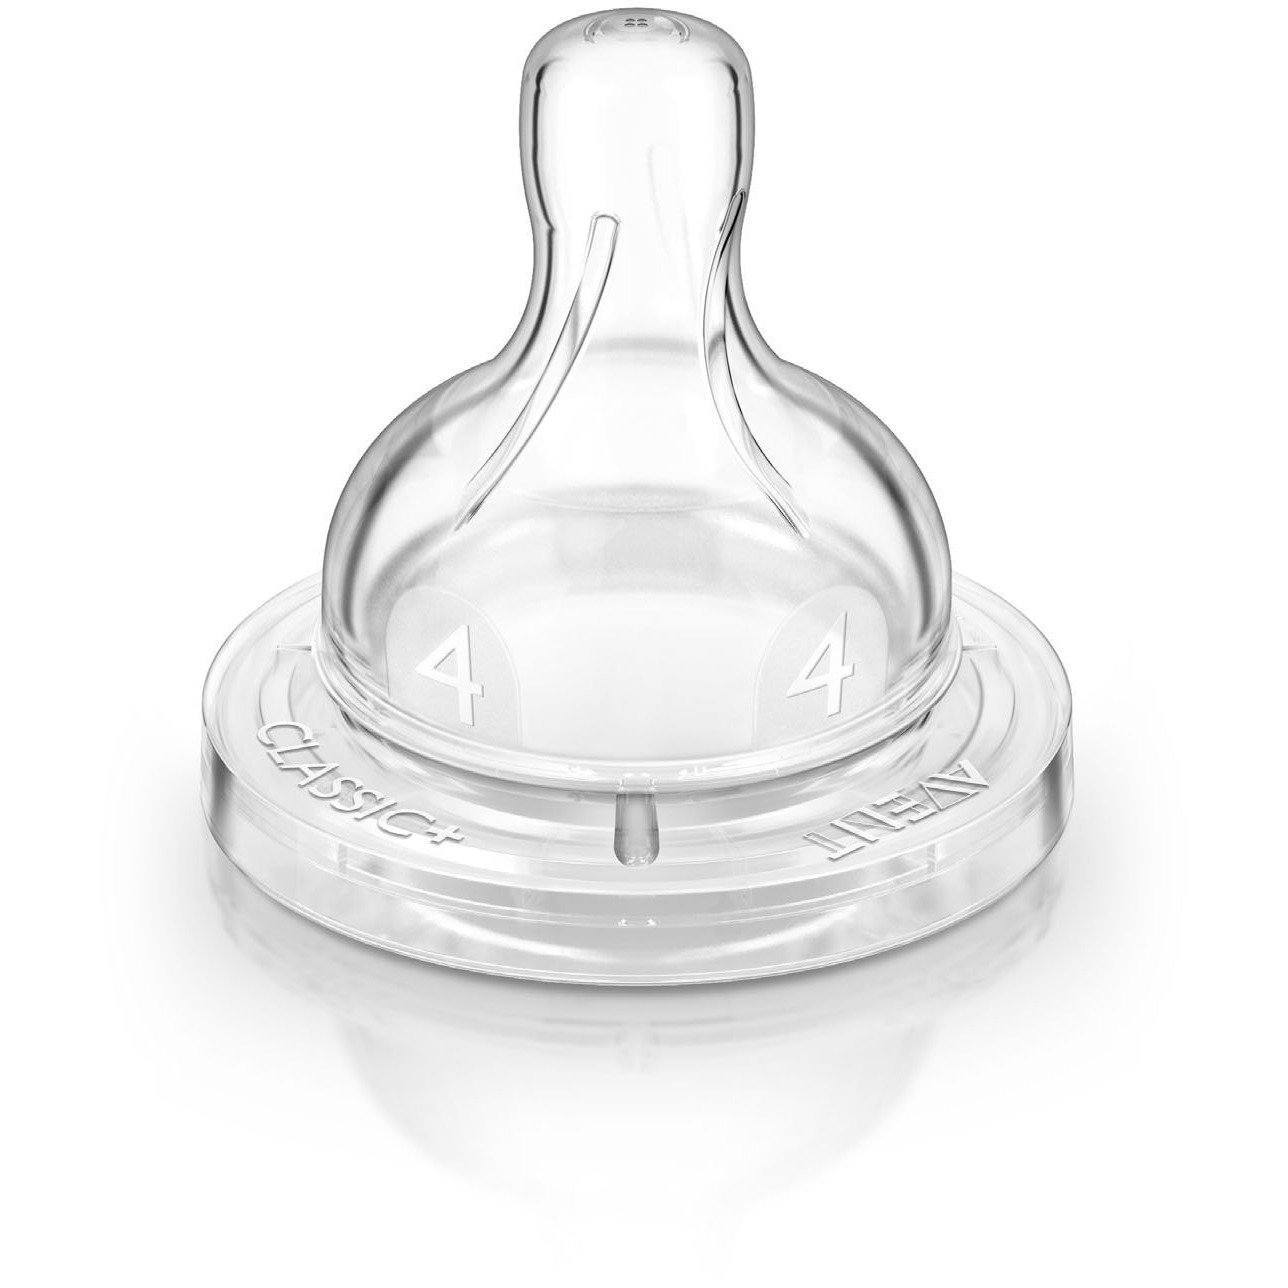 Philips AVENT Classic - Kit com 2 Bicos Extras Classic Anne Claire Baby Store 